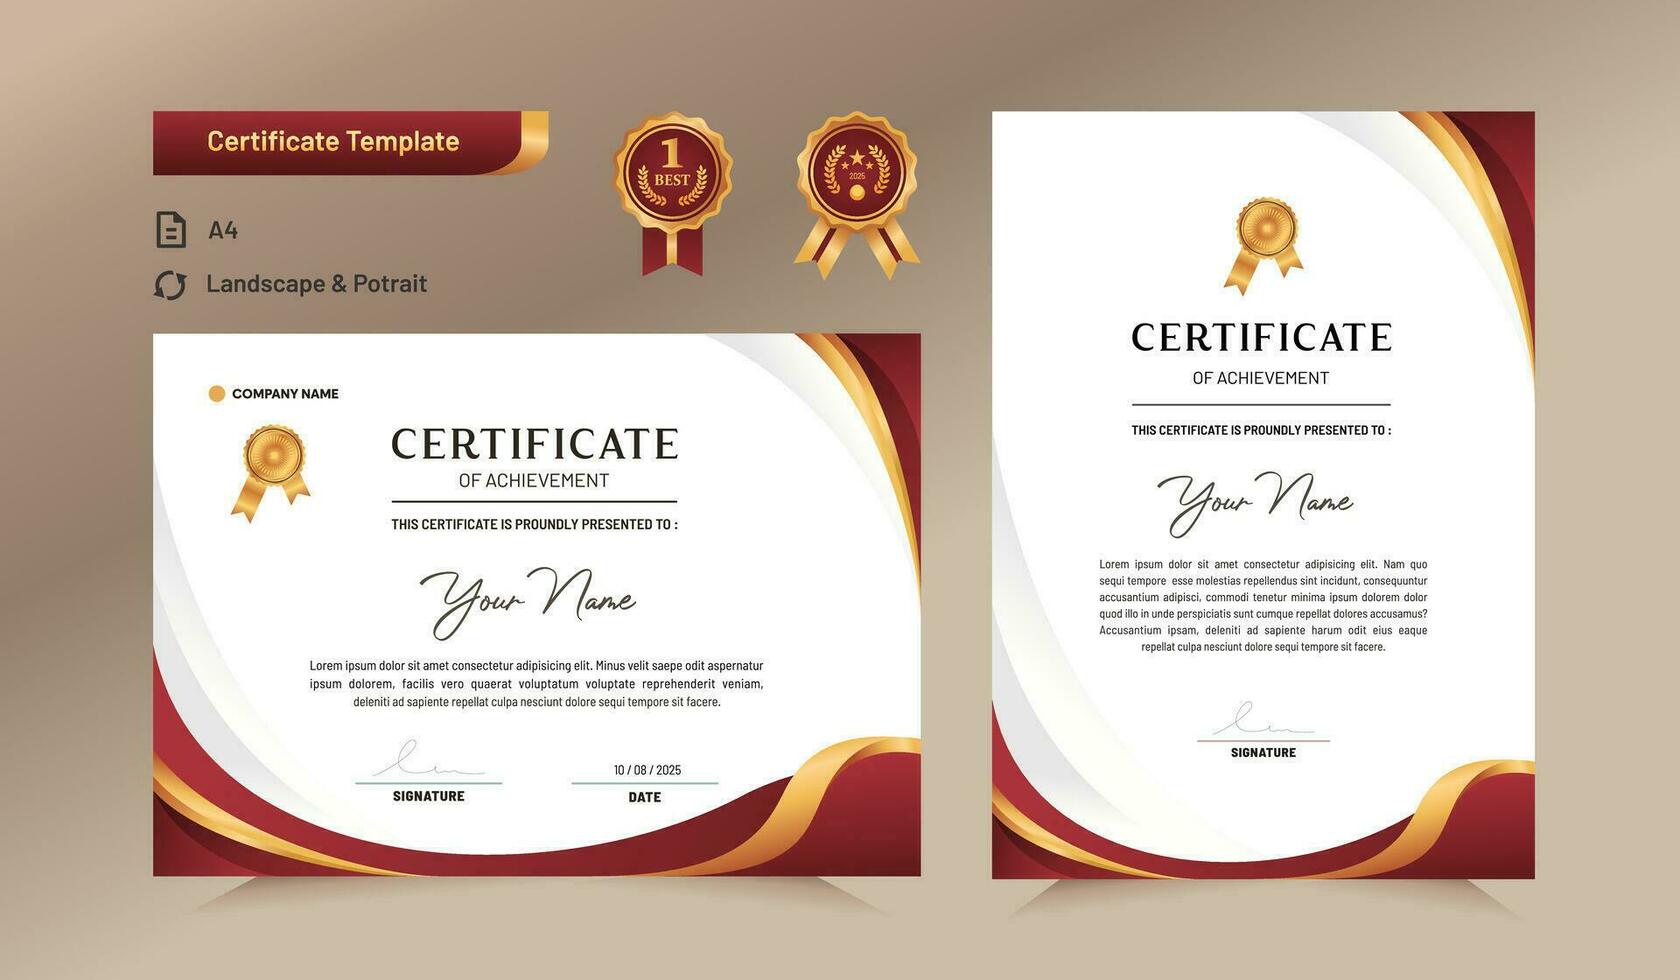 Red and gold certificate of achievement template. For award, business, and education needs. vector